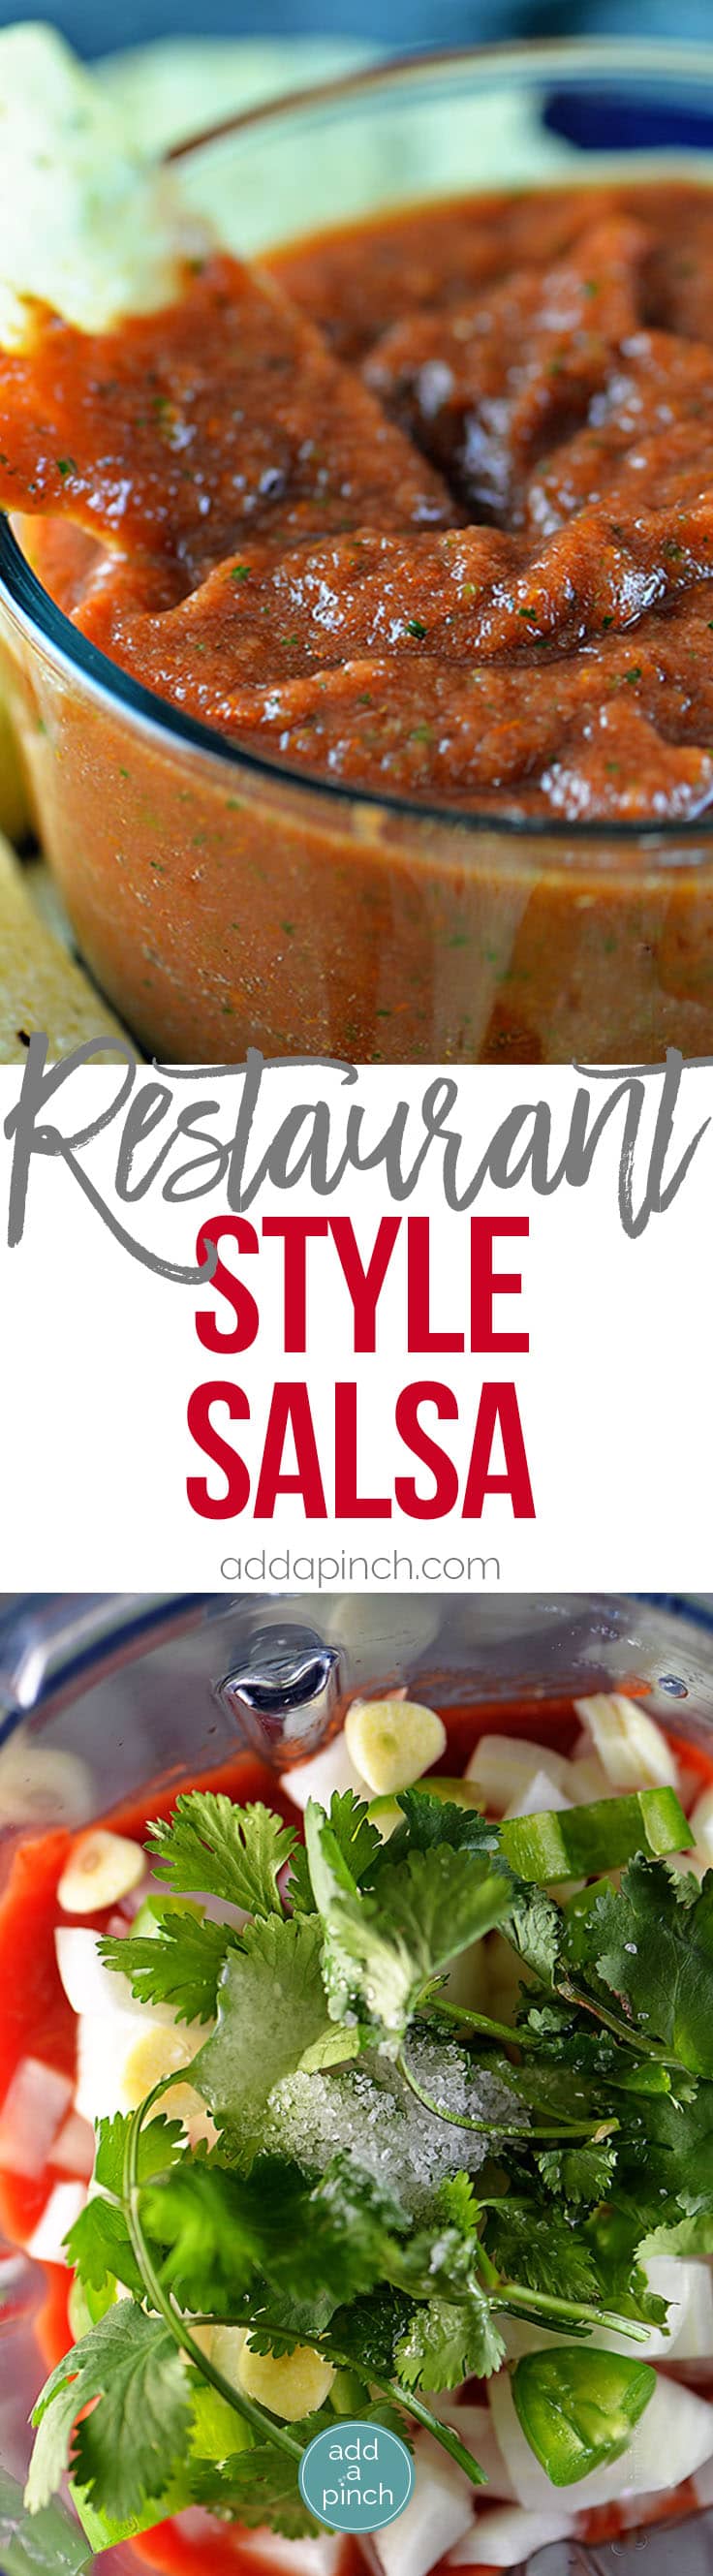 Easy Restaurant Style Salsa Recipe - This salsa recipe is easy to make in minutes! No cooking required for this fresh, delicious restaurant style salsa recipe! // addapinch.com